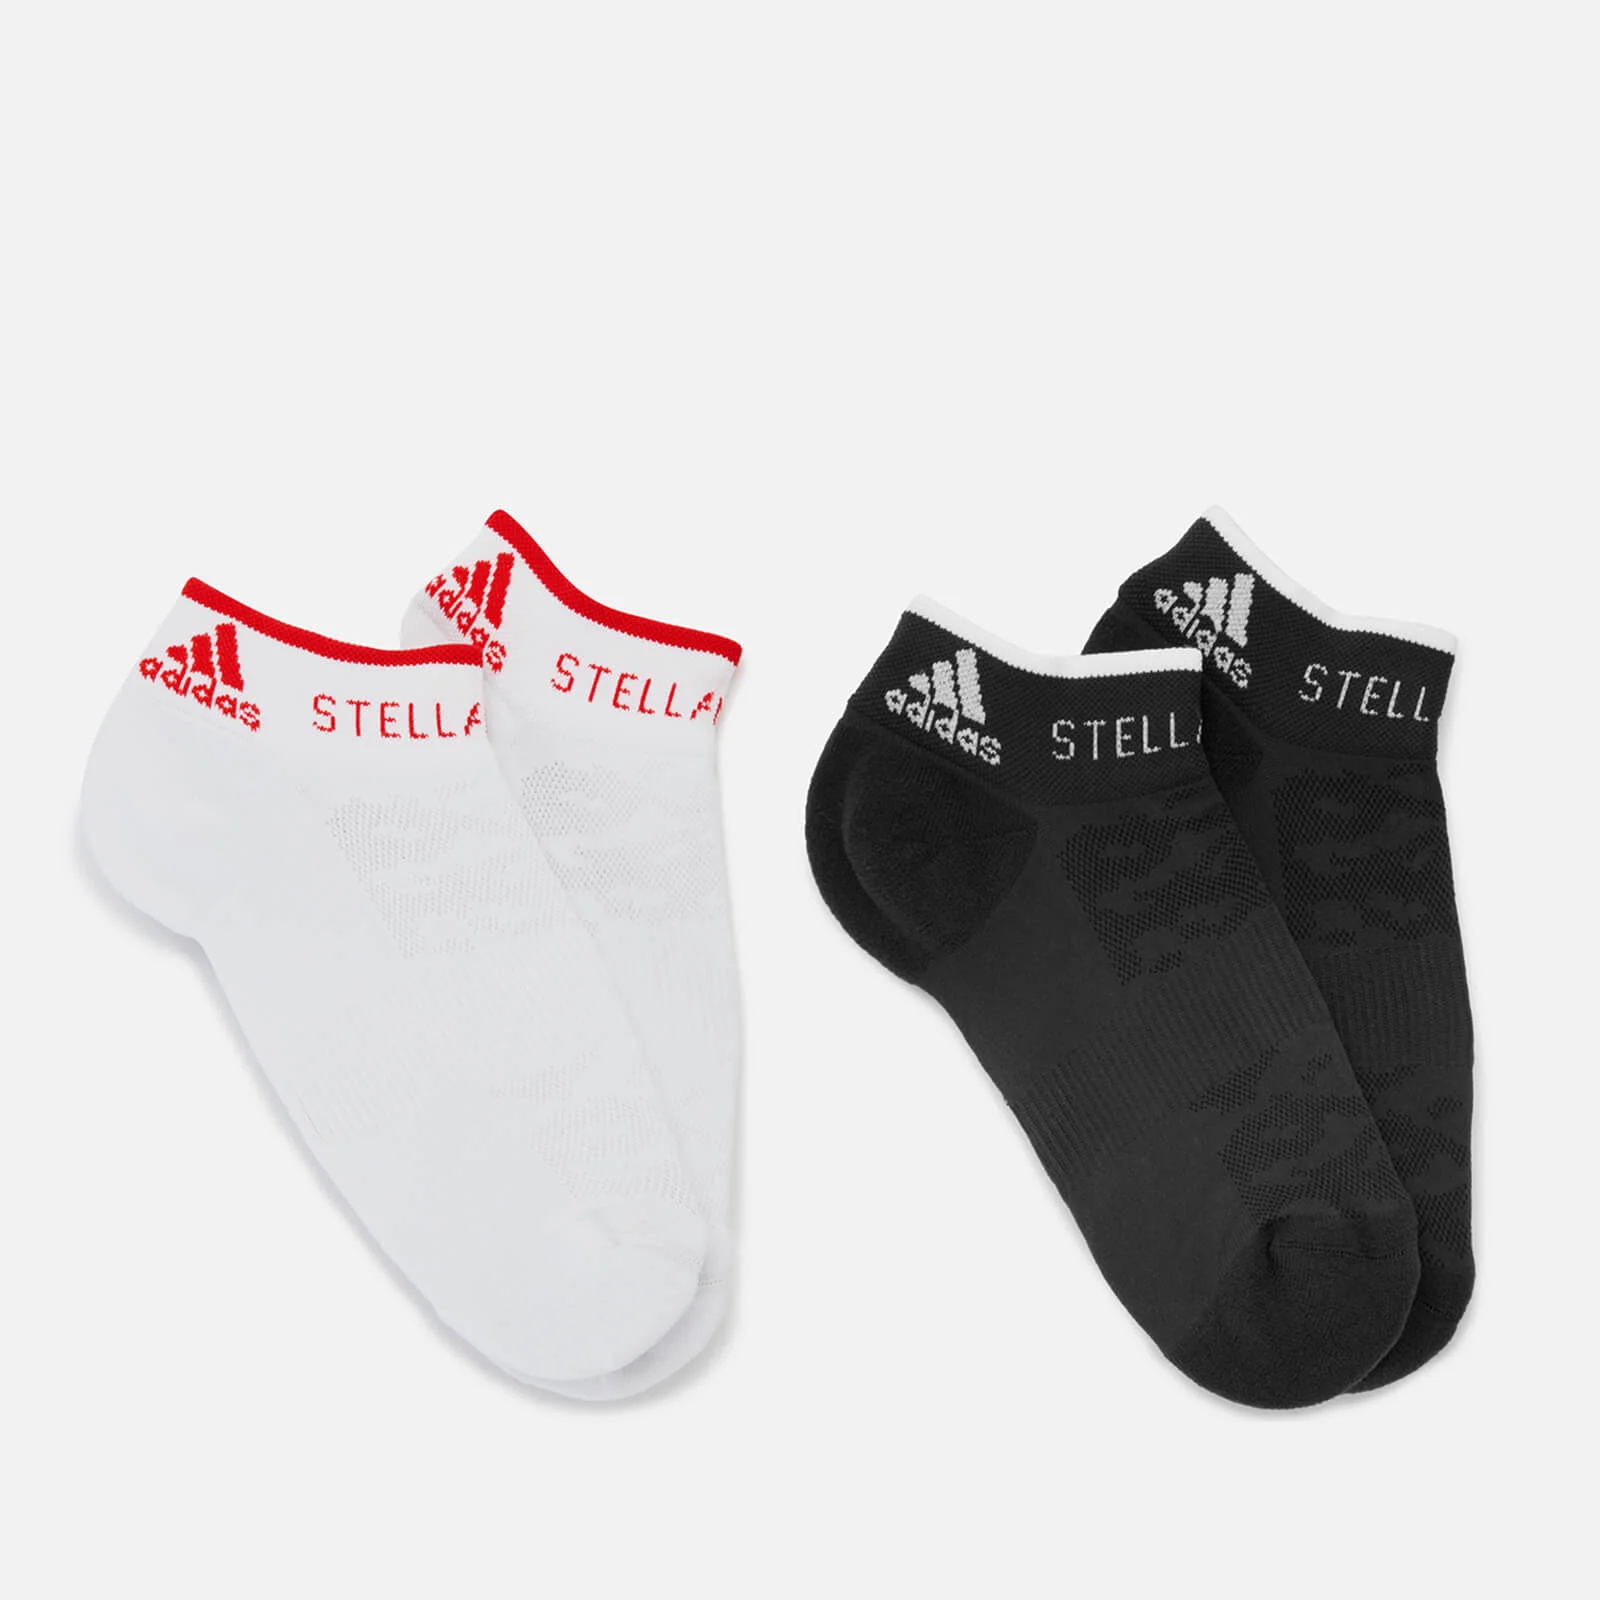 adidas by Stella McCartney Women's Ankle Socks - White/Active Red Image 1